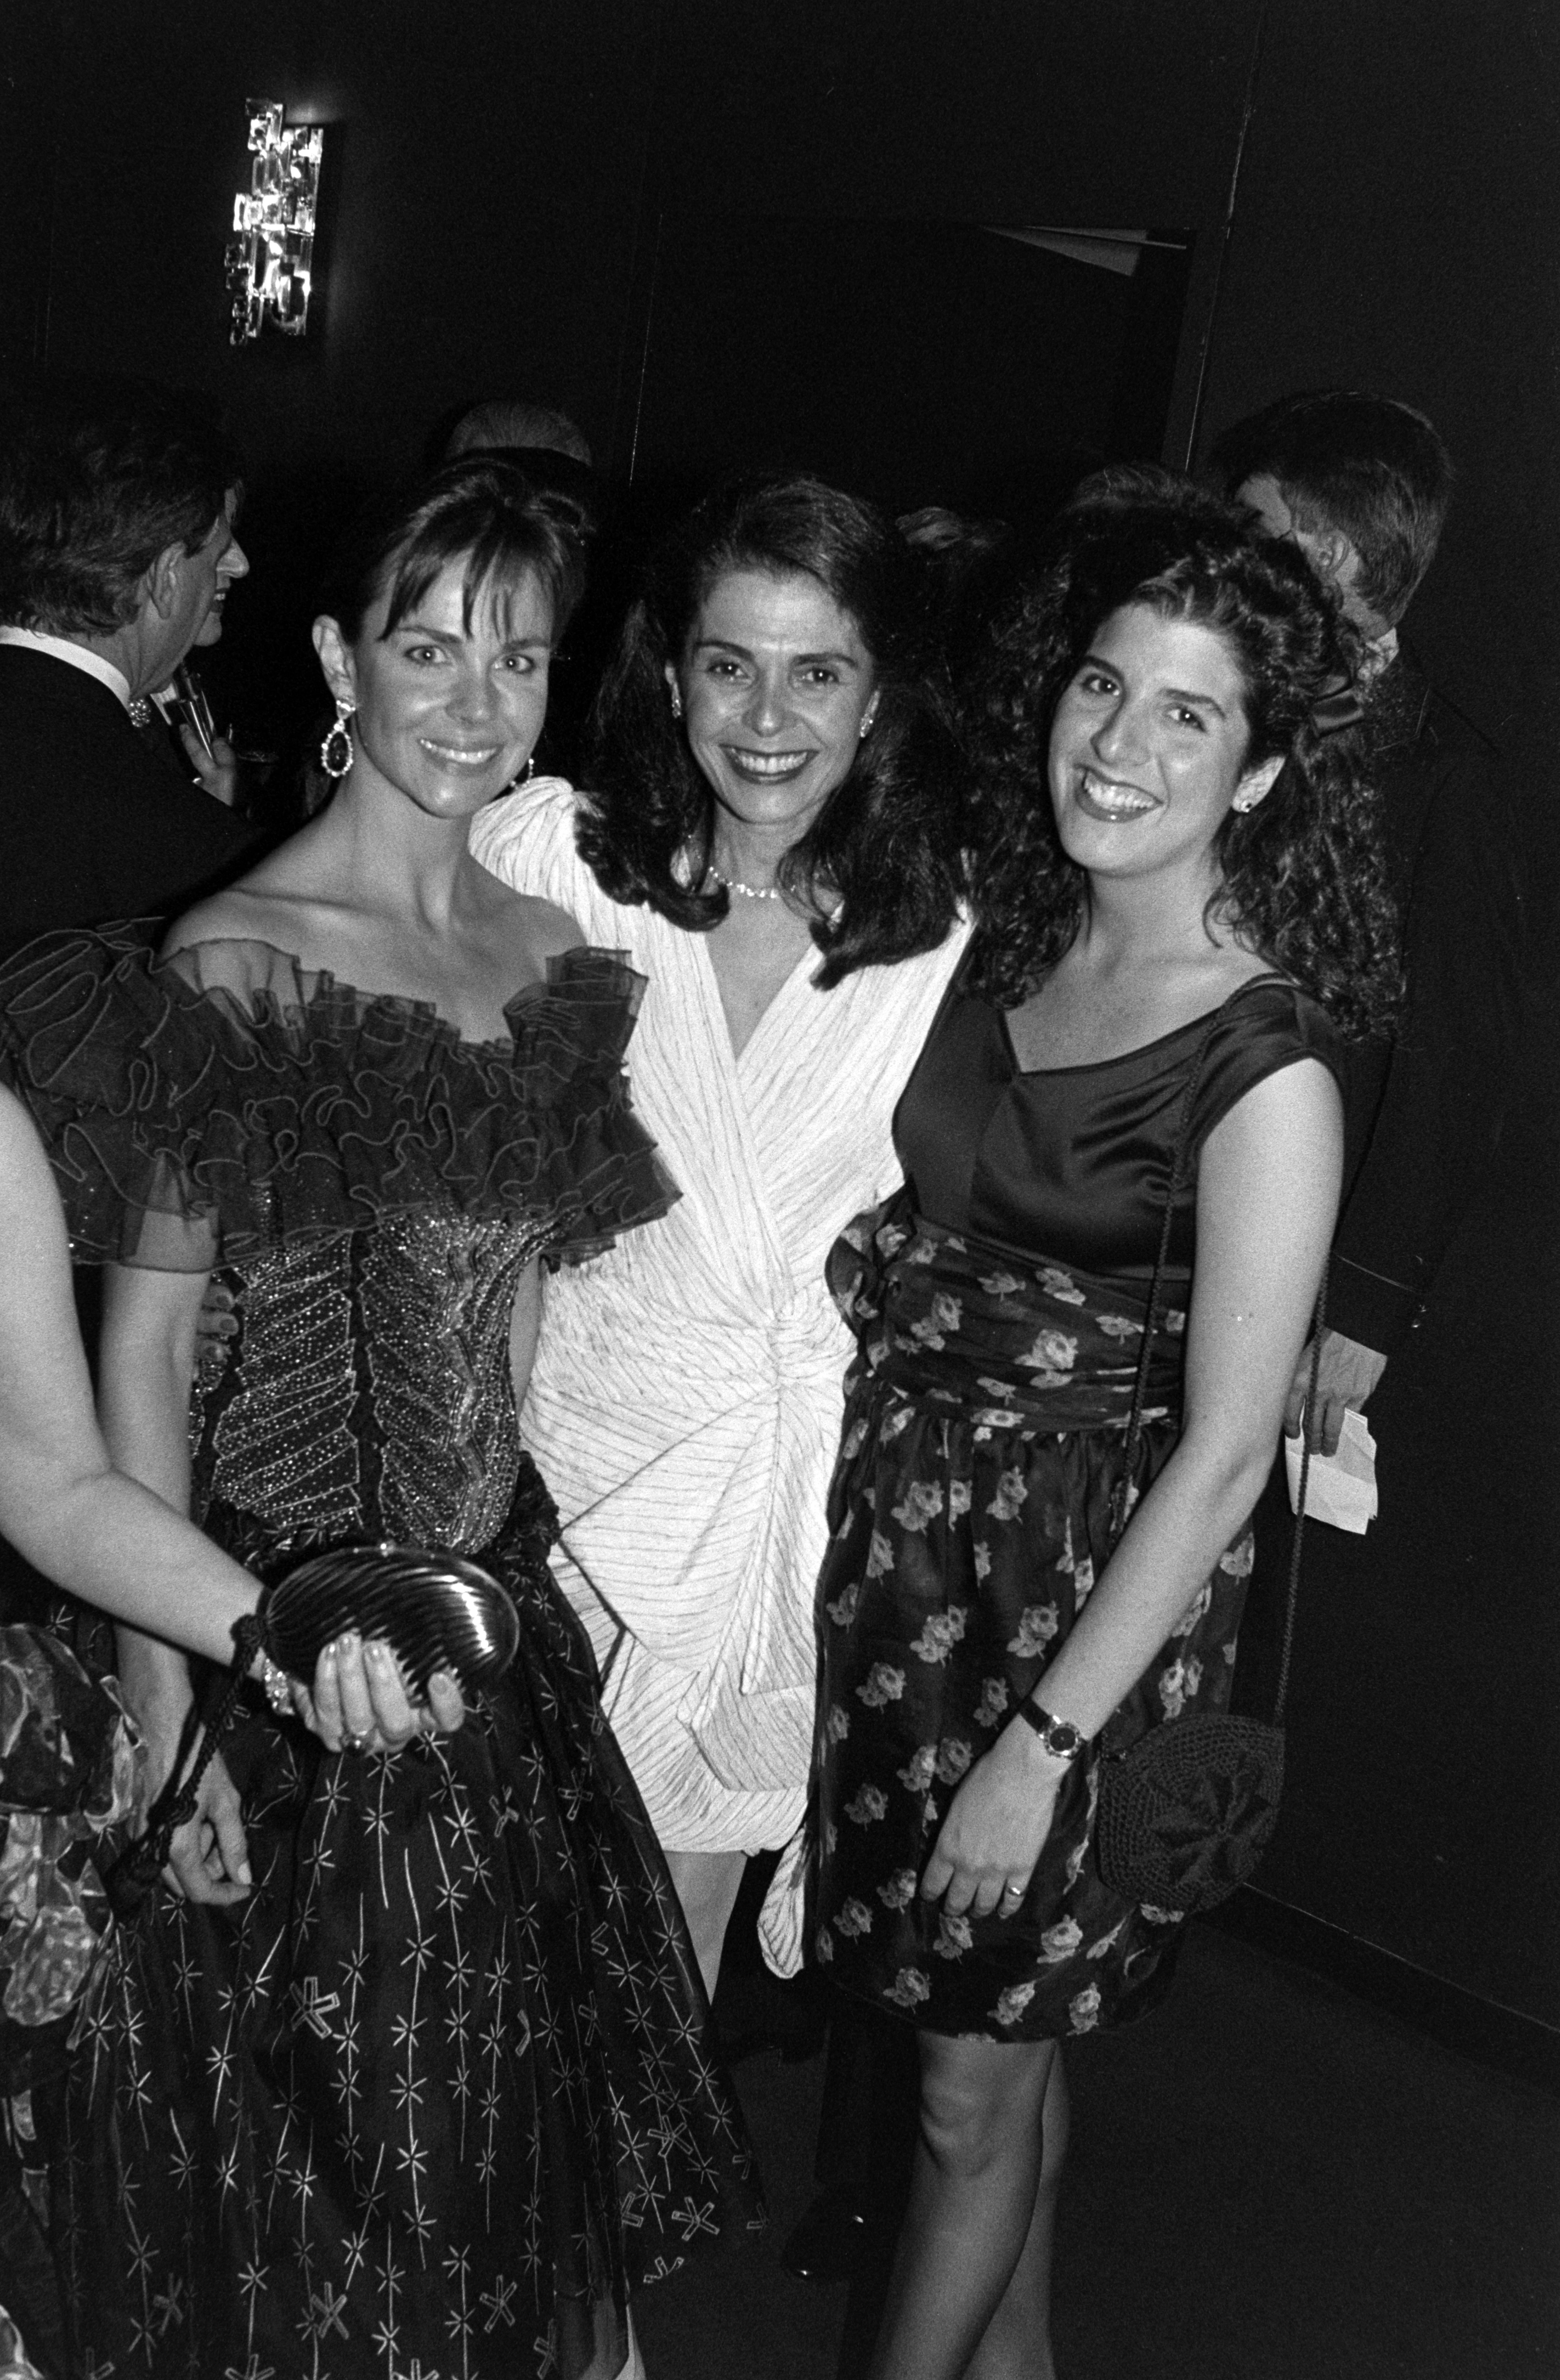 Claudia Peltz (L) and guests attend an event at Lincoln Center on June 28, 1988, in New York City | Source: Getty Images